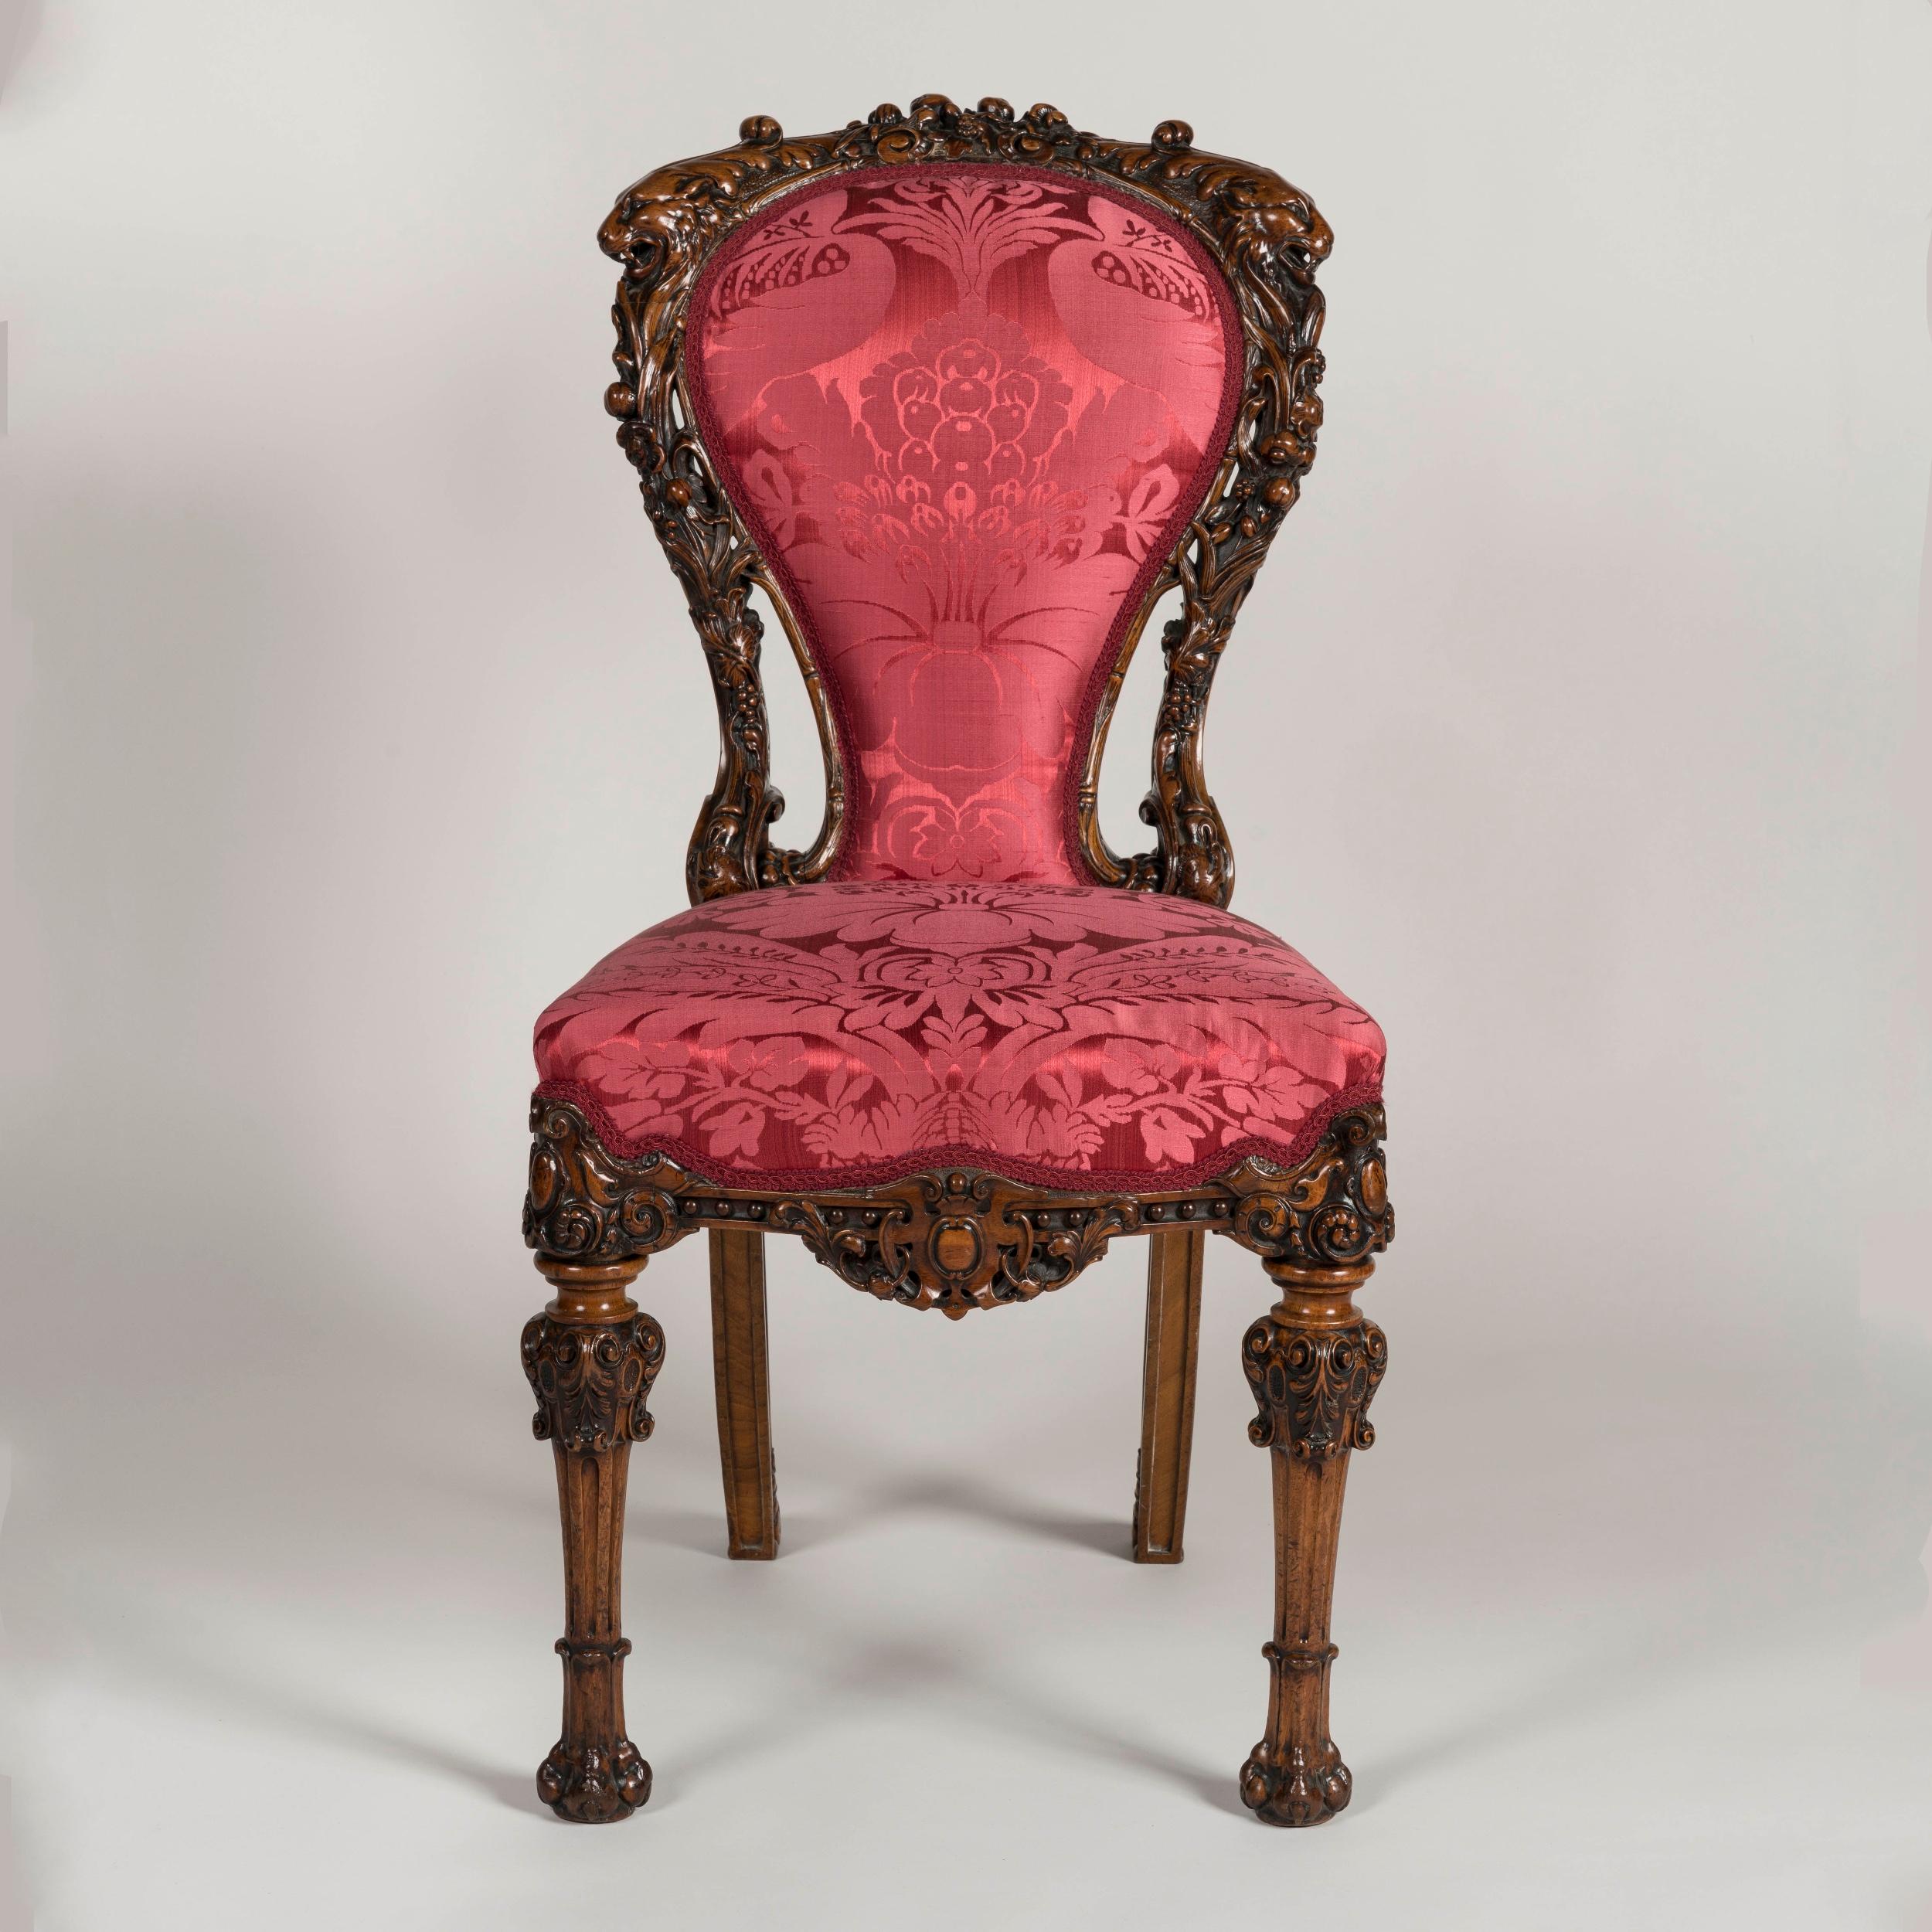 An Exhibition-Quality carved chair
Possibly by Mssrs Hunter of London

An exuberant and striking example of mid-nineteenth century furniture craft, the single chair carved from solid Walnut, with hand-carved details throughout including stylised